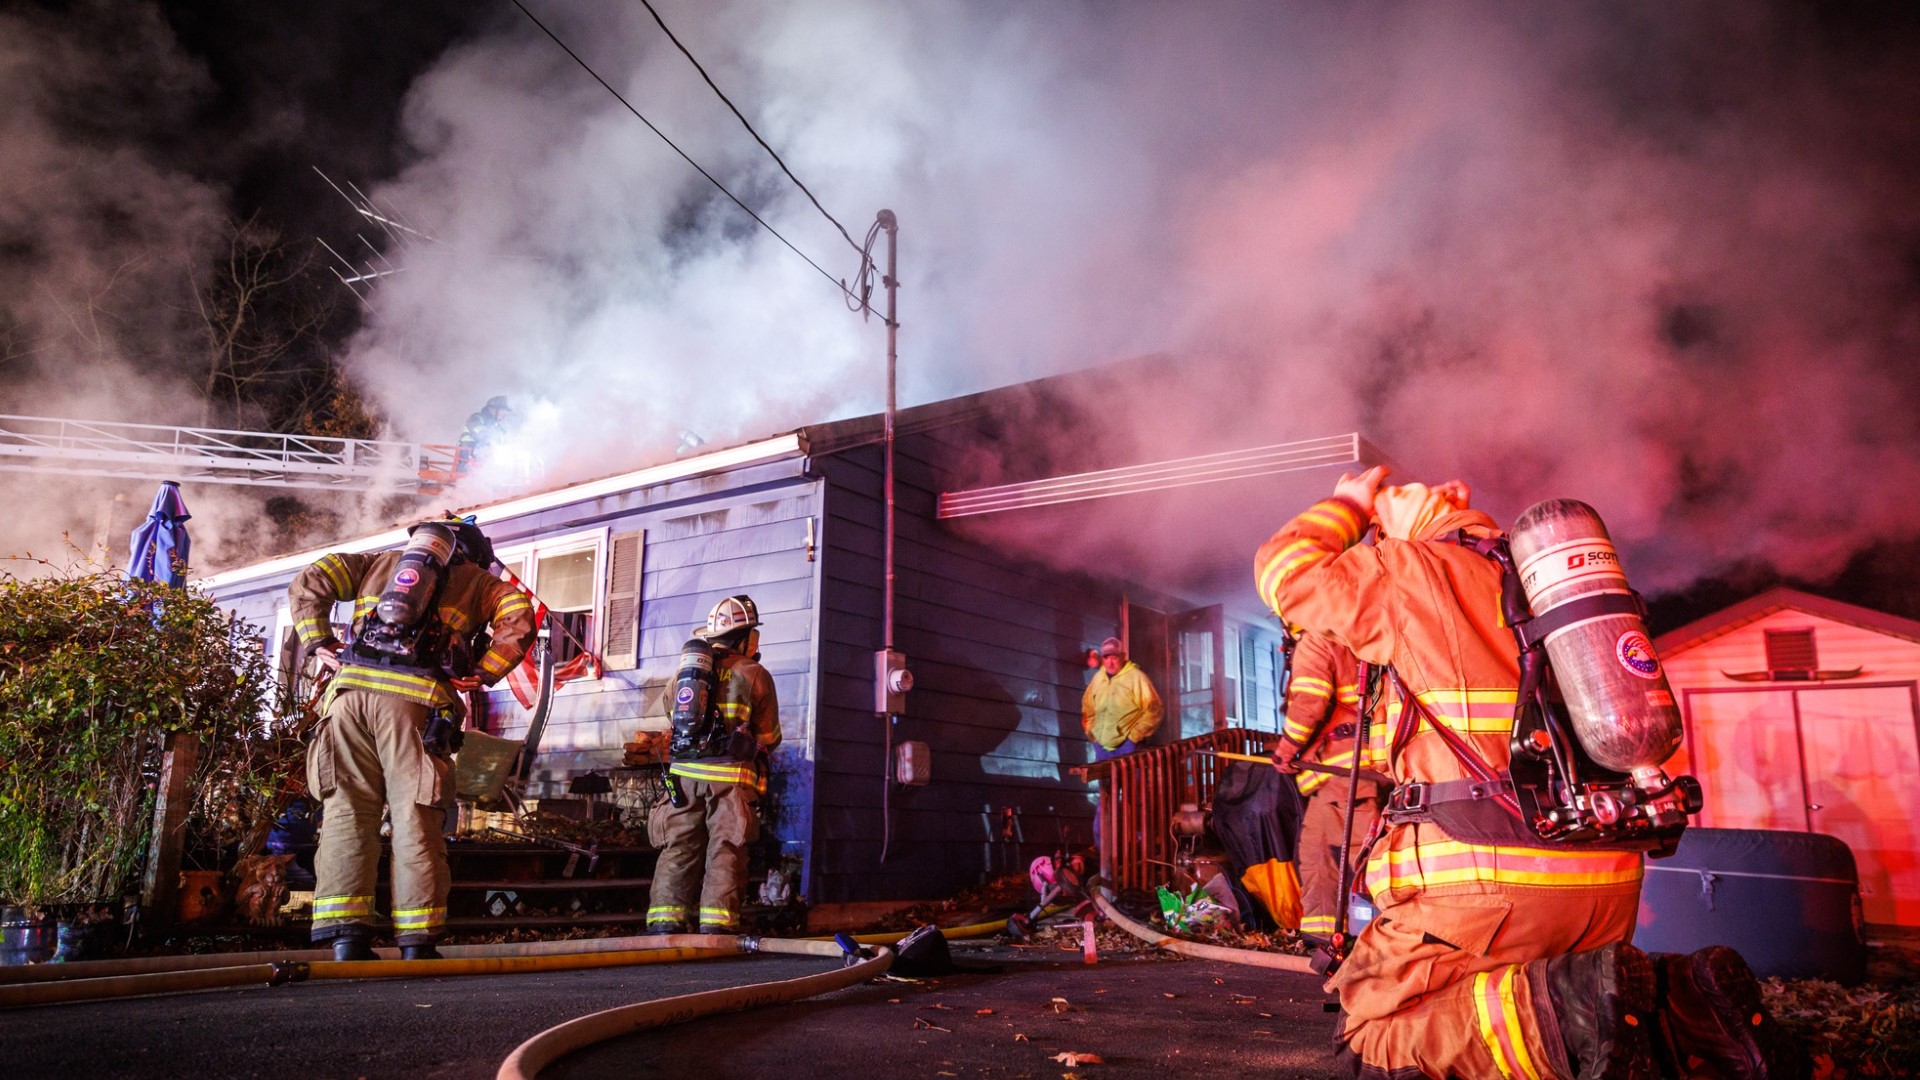 The home, which belonged to one of the Barlow Volunteer Fire Department members, has been deemed a "total loss," officials said.